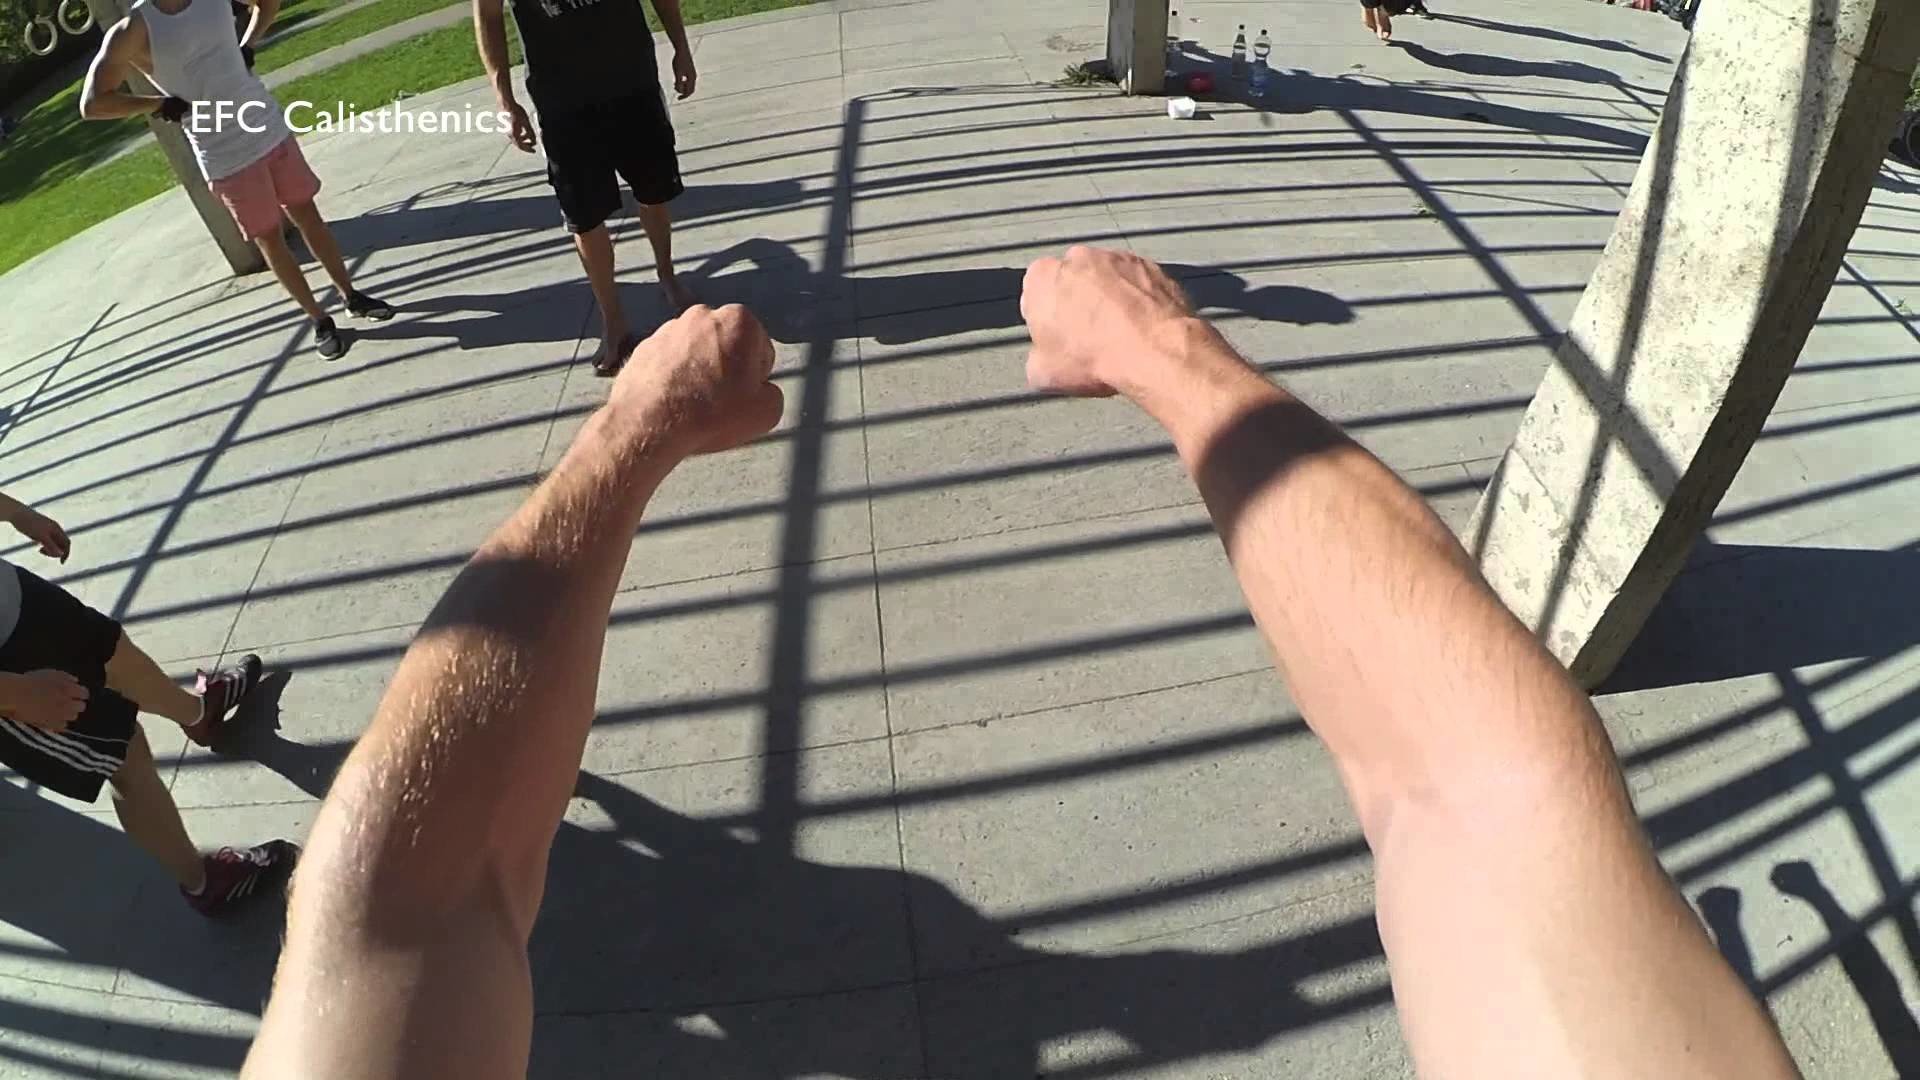 1920x1080 EFC Calisthenics in 55sec - First Person View (FPV) Street Workout